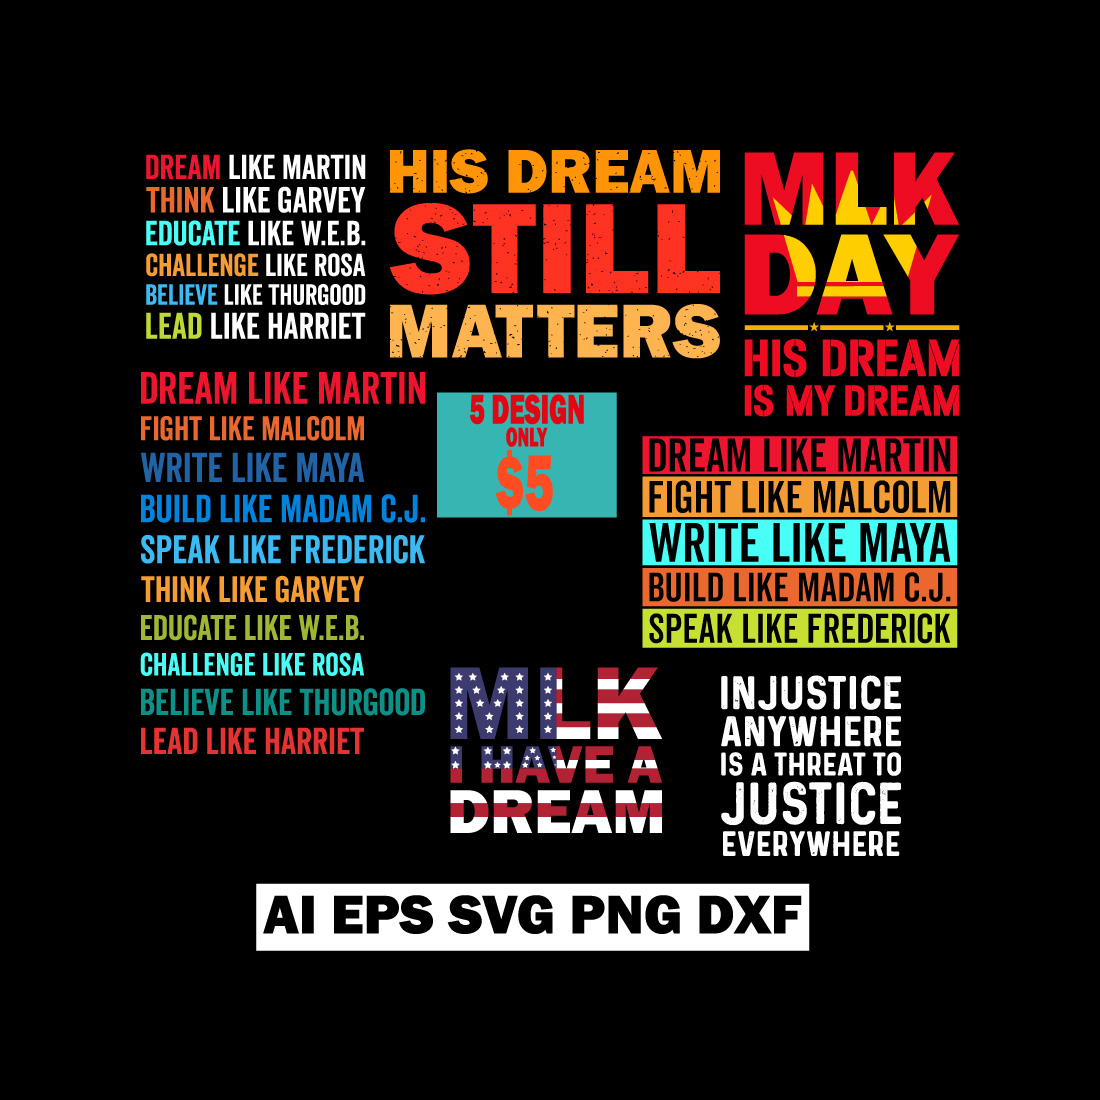 Martin Luther King J.R Day T-shirt Design Typography Bundle main cover.